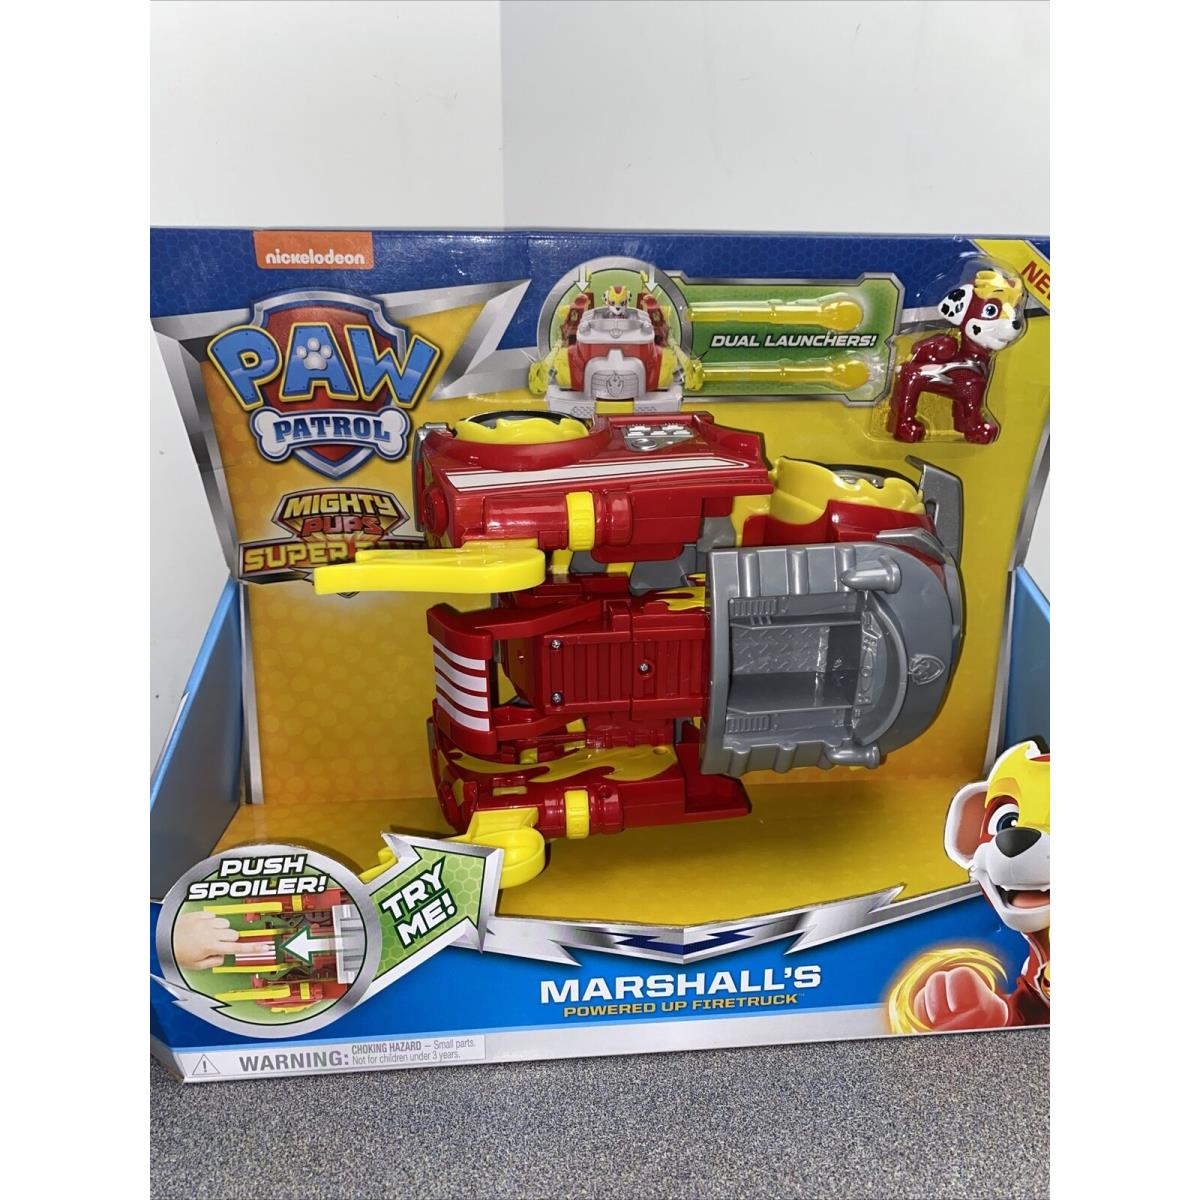 Paw Patrol Mighty Pups Super Marshall Chase s Powered Up Cruiser Transforming